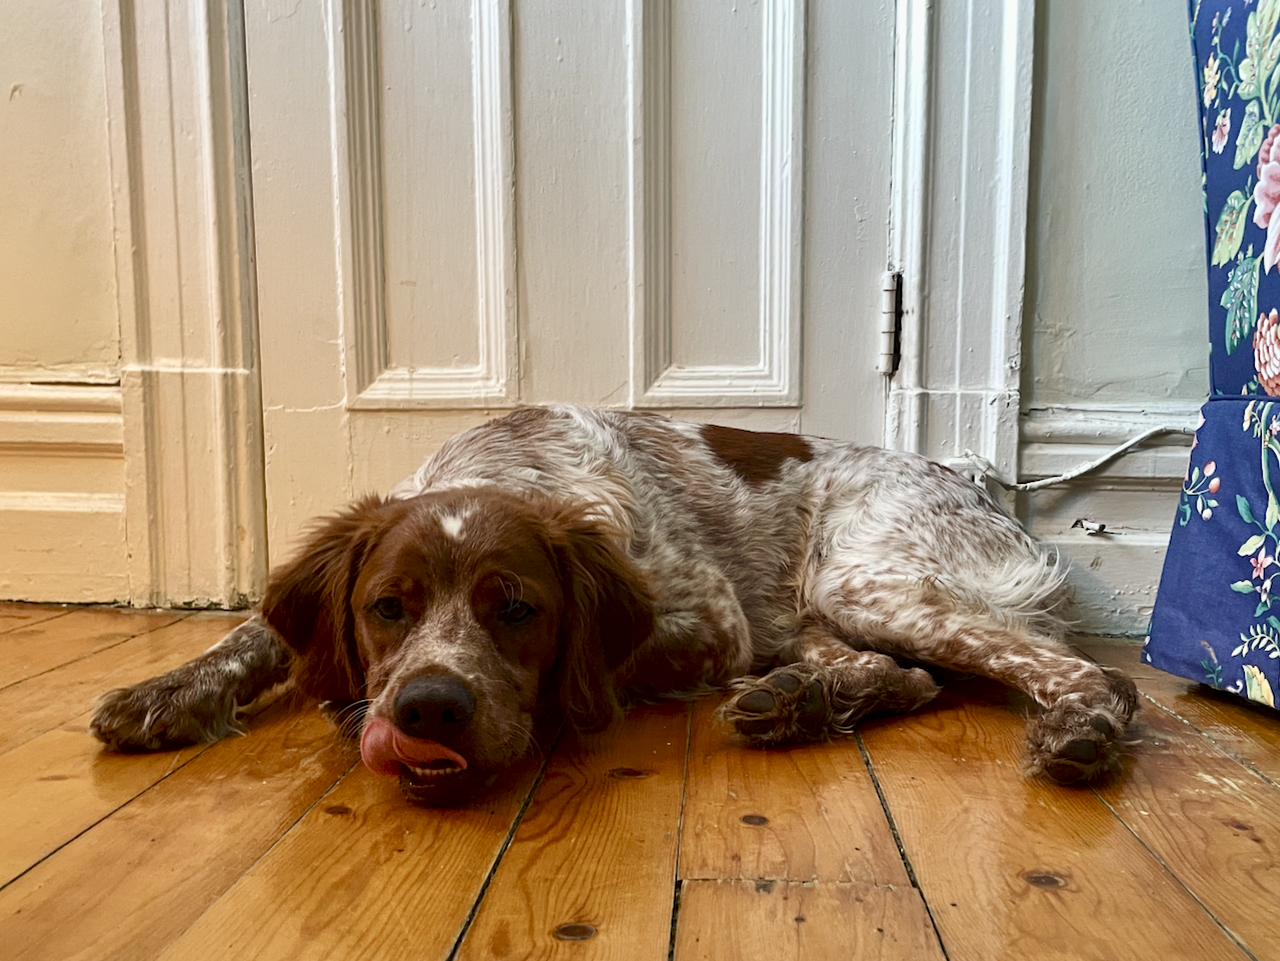 A 6 month old Brittany dog falling asleep on a wooden floor, licking his nose.